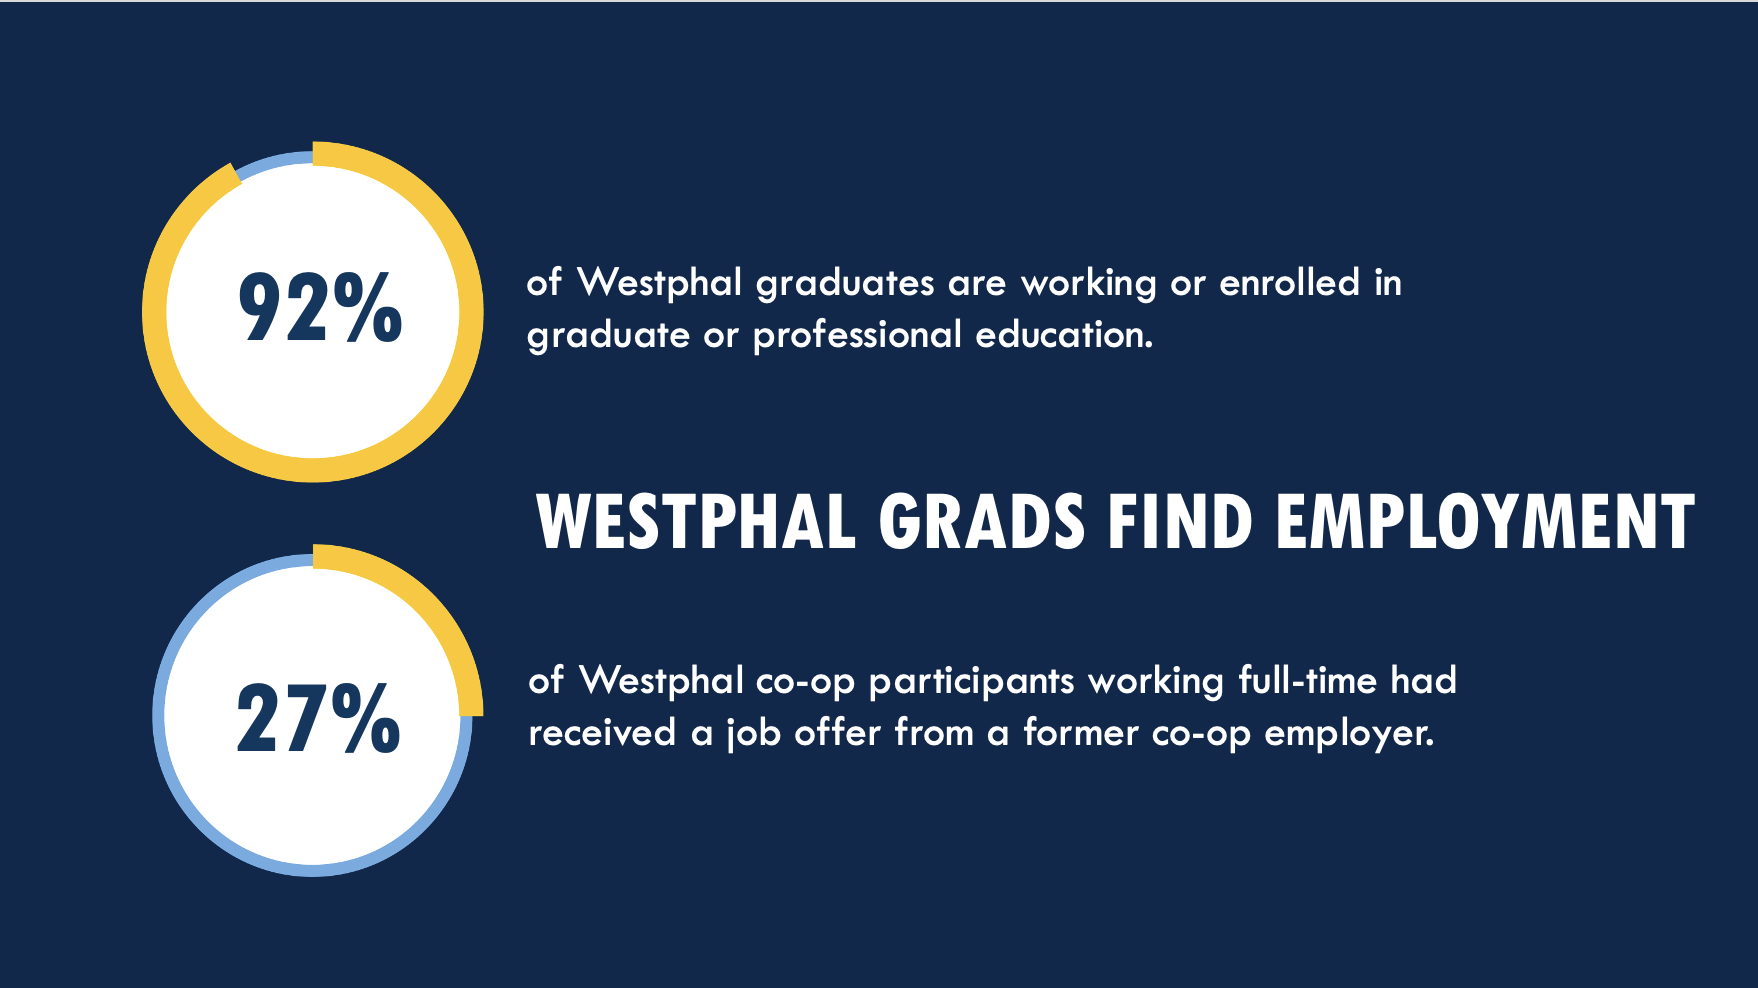 92% of Westphal grads are working or enrolled in graduate or professional education